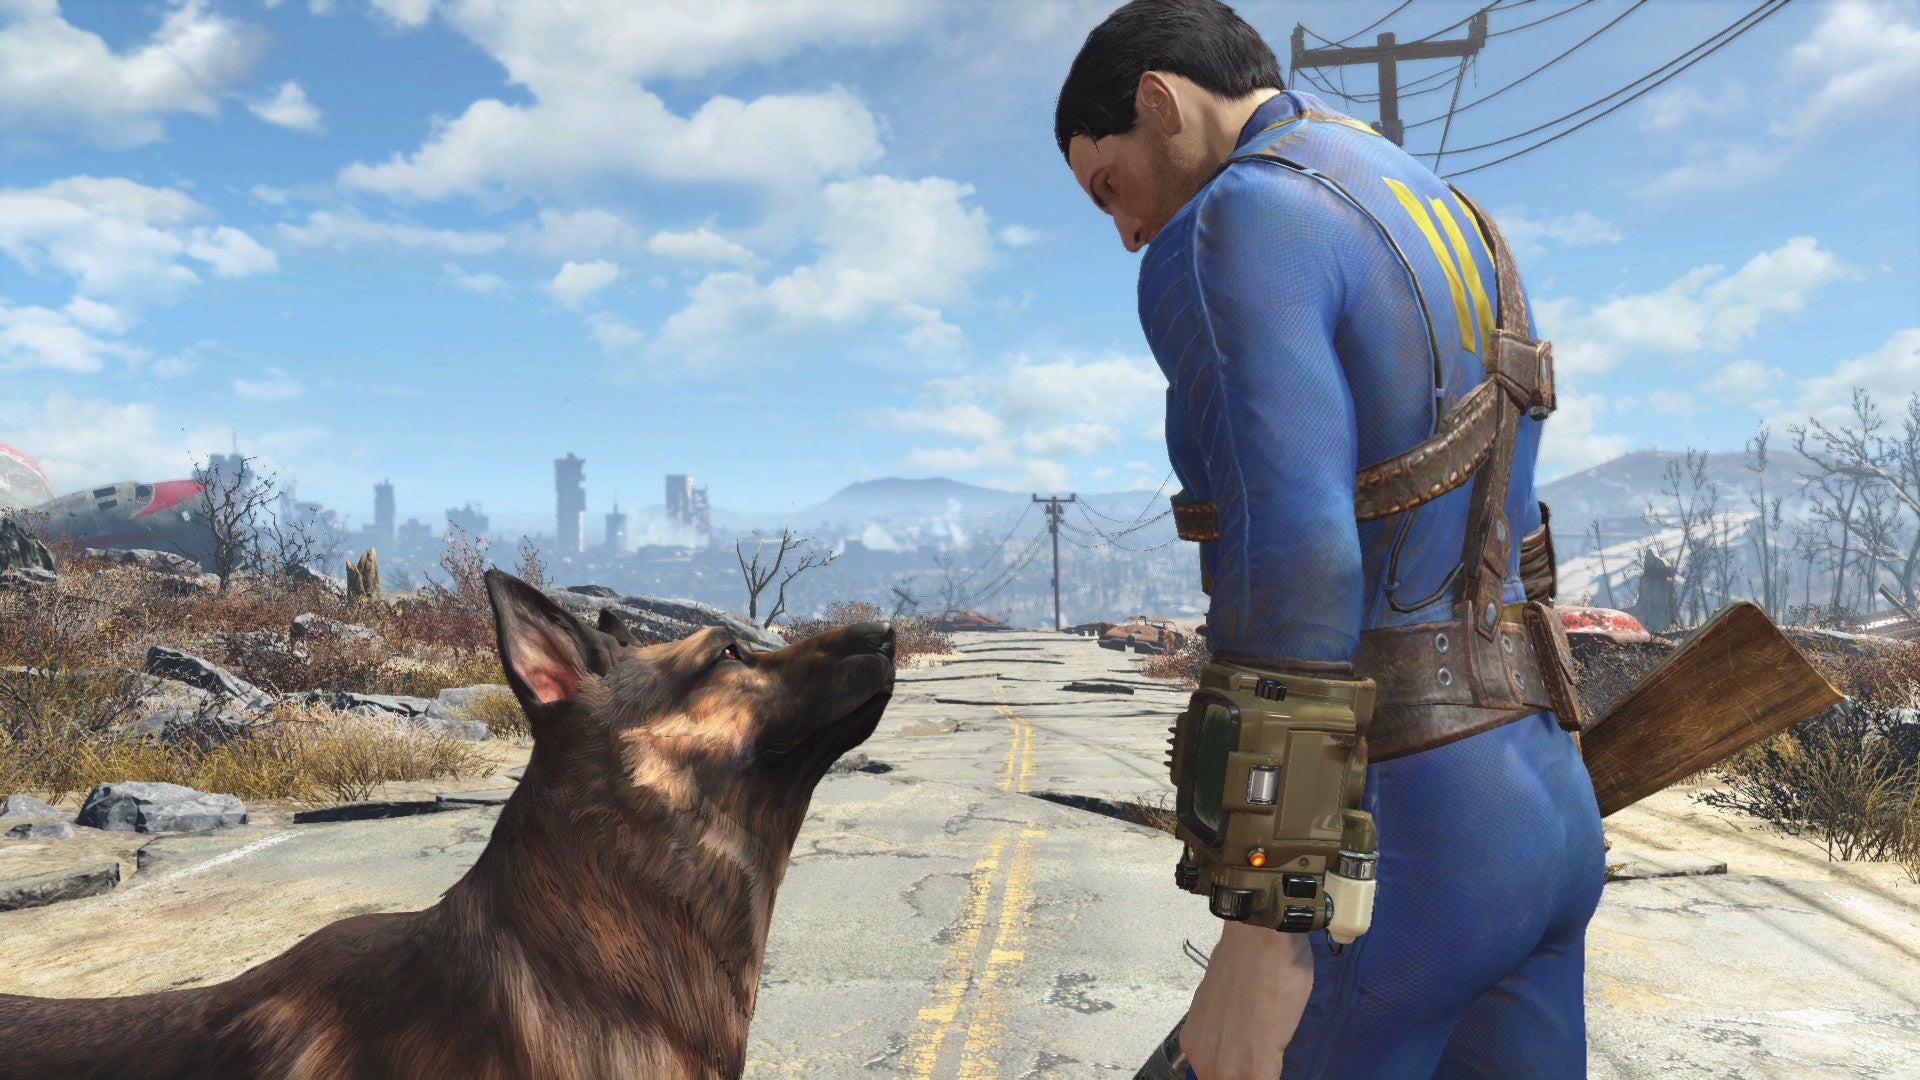 A man and his dog in a Fallout 4 screenshot.